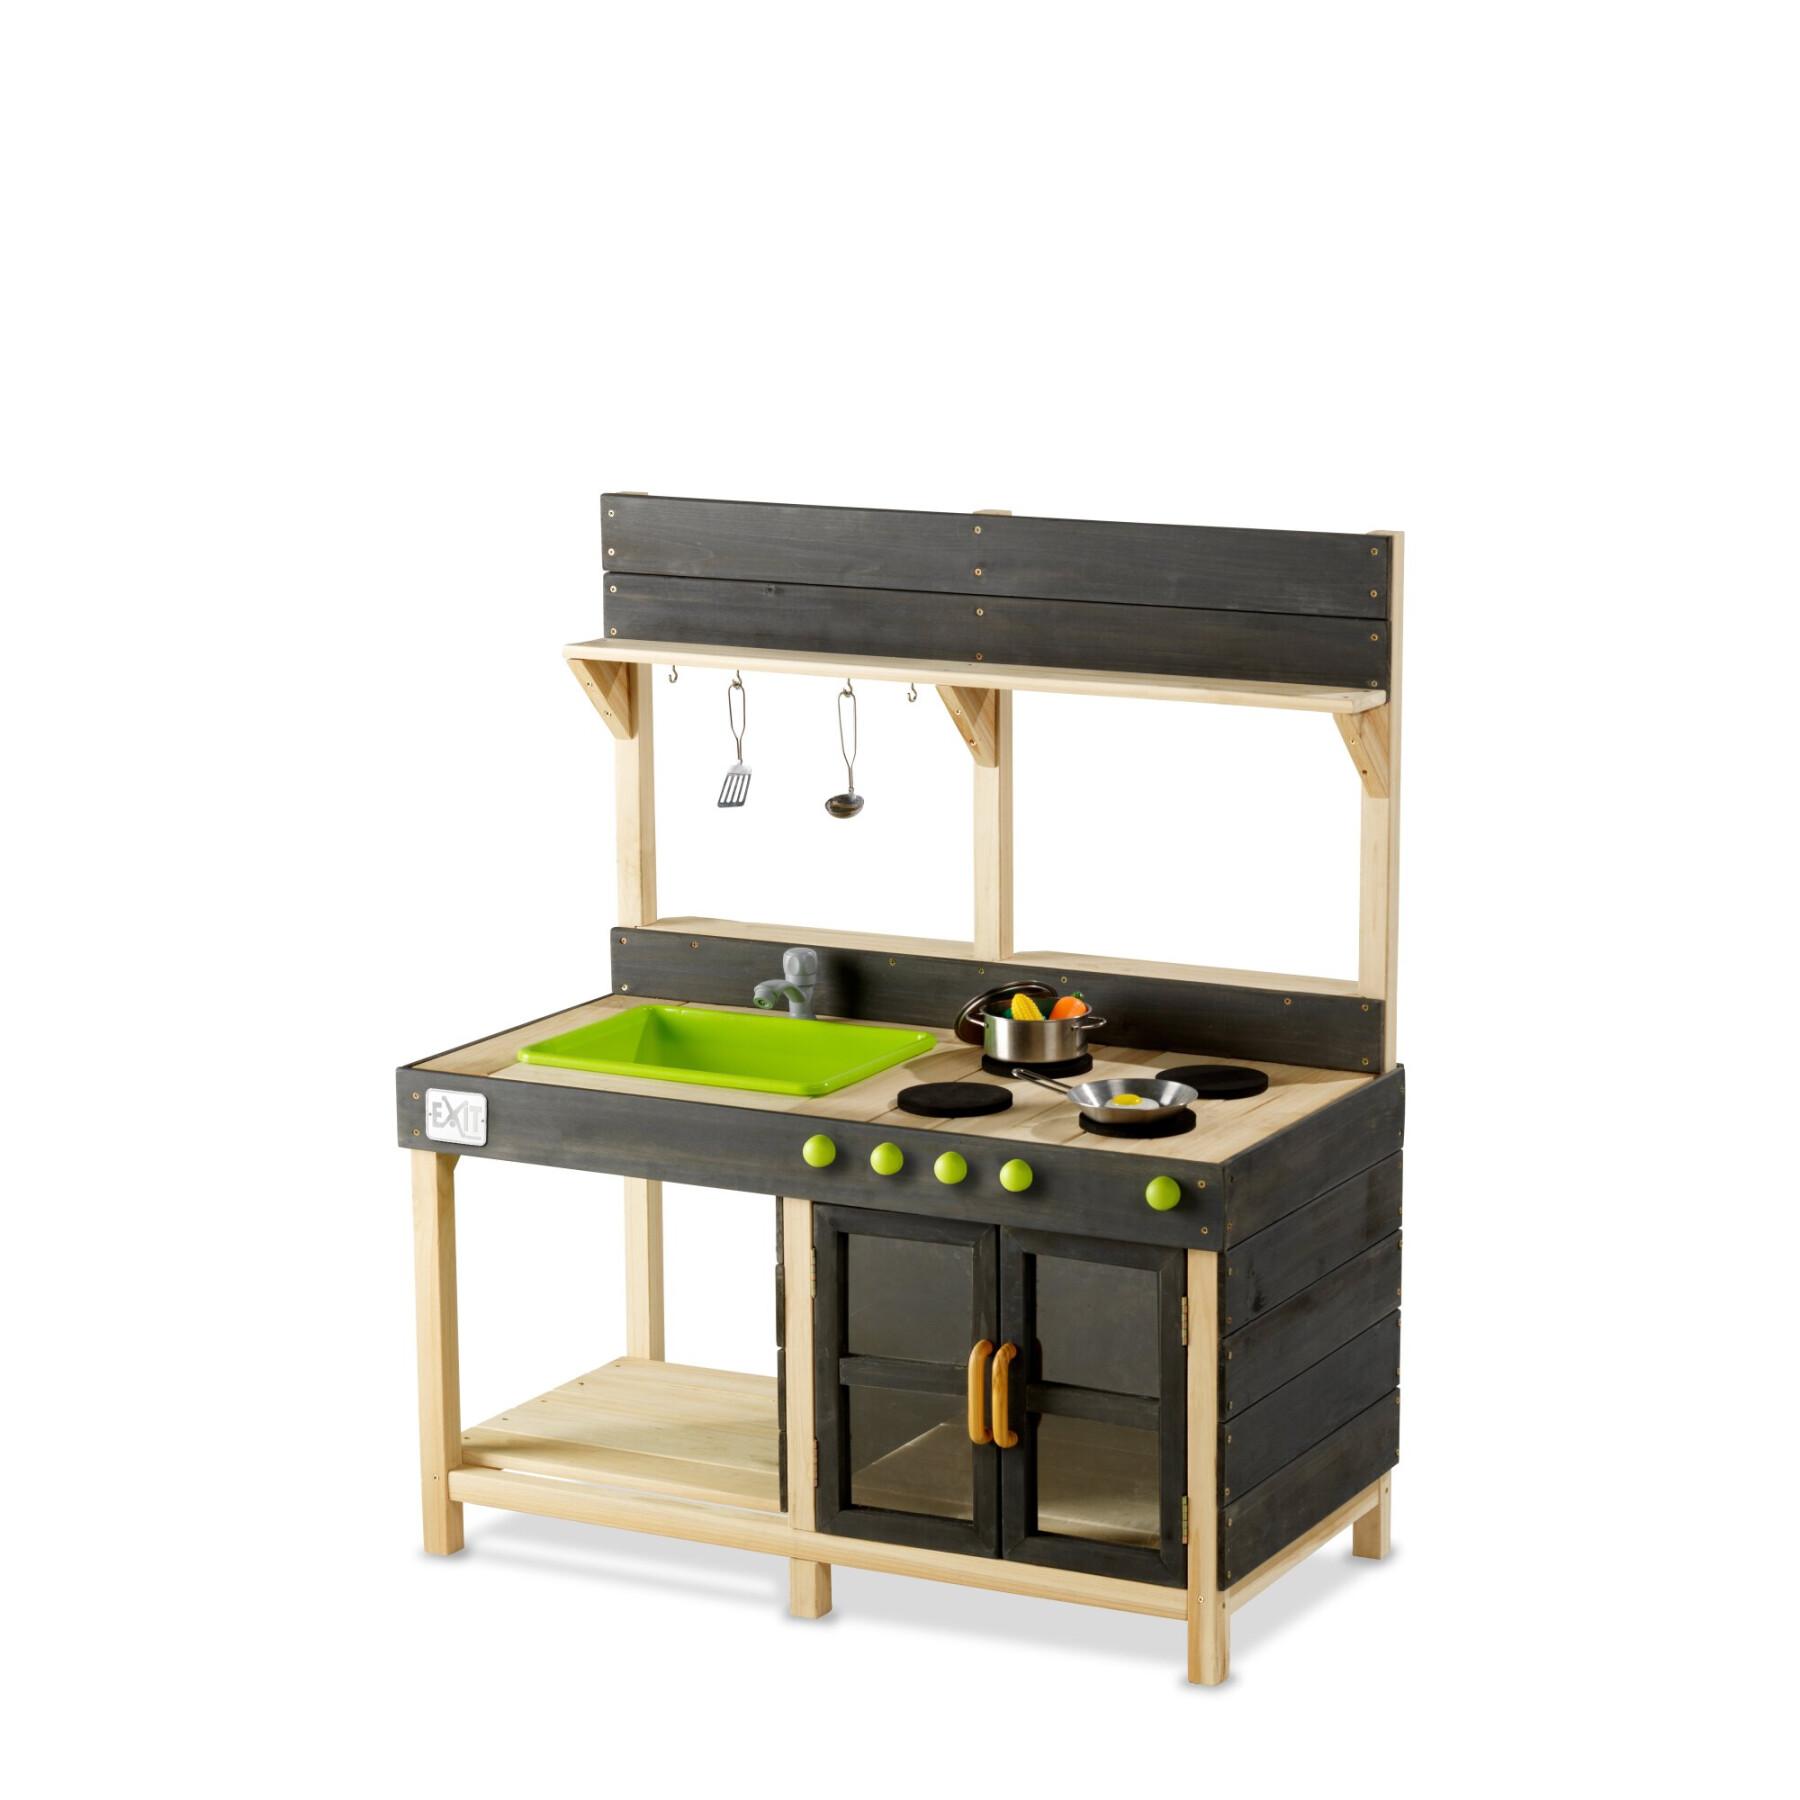 Outdoor wooden kitchen Exit Toys Yummy 200